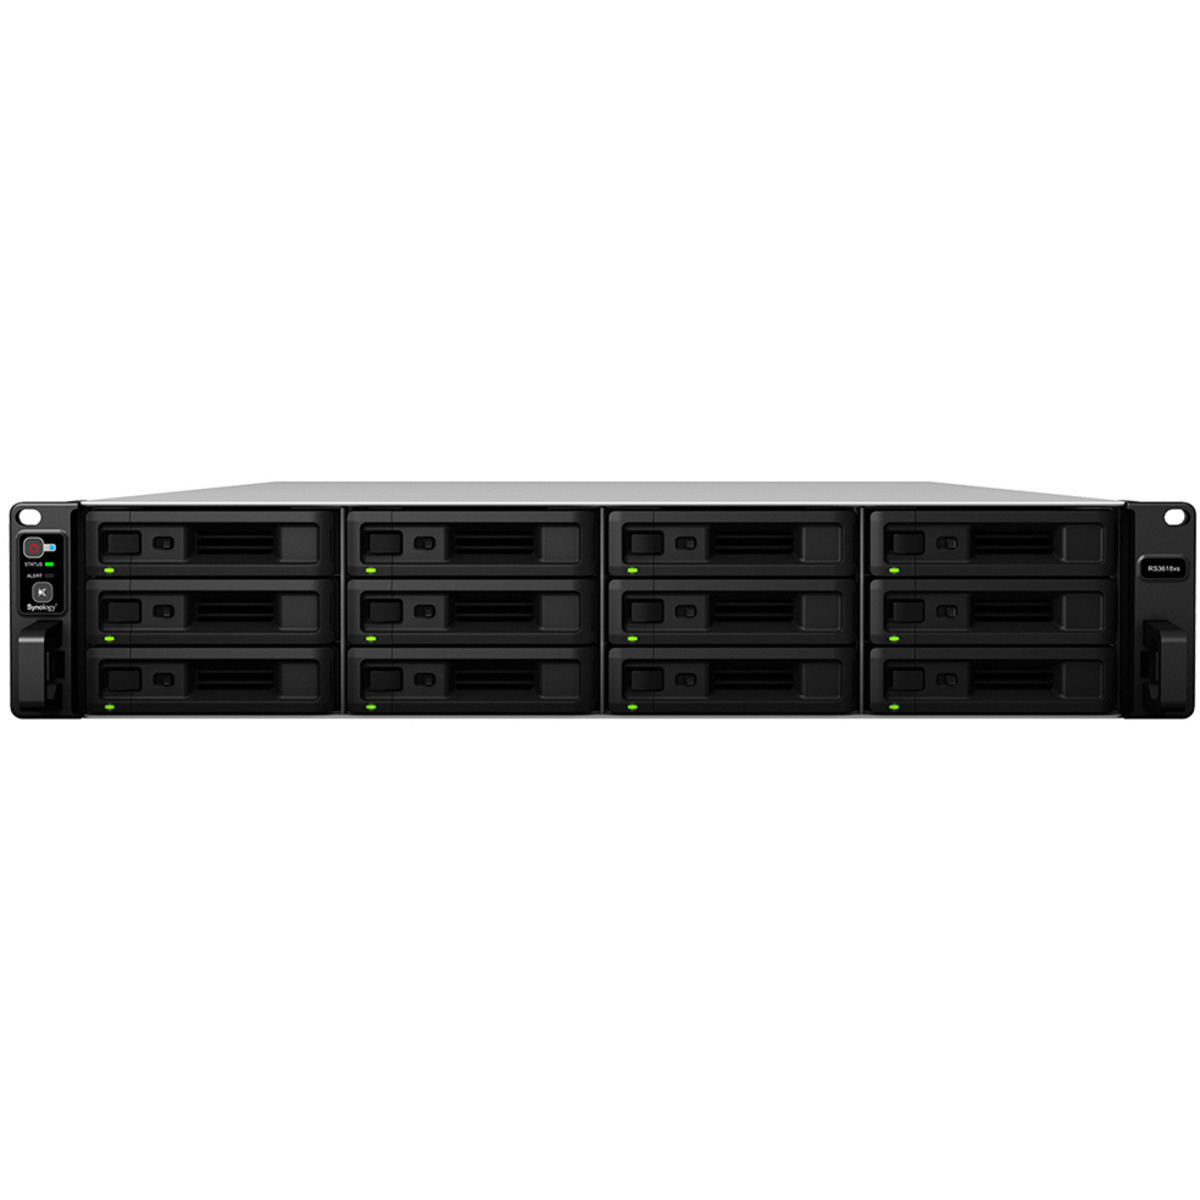 Synology RackStation RS3618xs 40tb 12-Bay RackMount Large Business / Enterprise NAS - Network Attached Storage Device 10x4tb Western Digital Red Plus WD40EFPX 3.5 5400rpm SATA 6Gb/s HDD NAS Class Drives Installed - Burn-In Tested RackStation RS3618xs